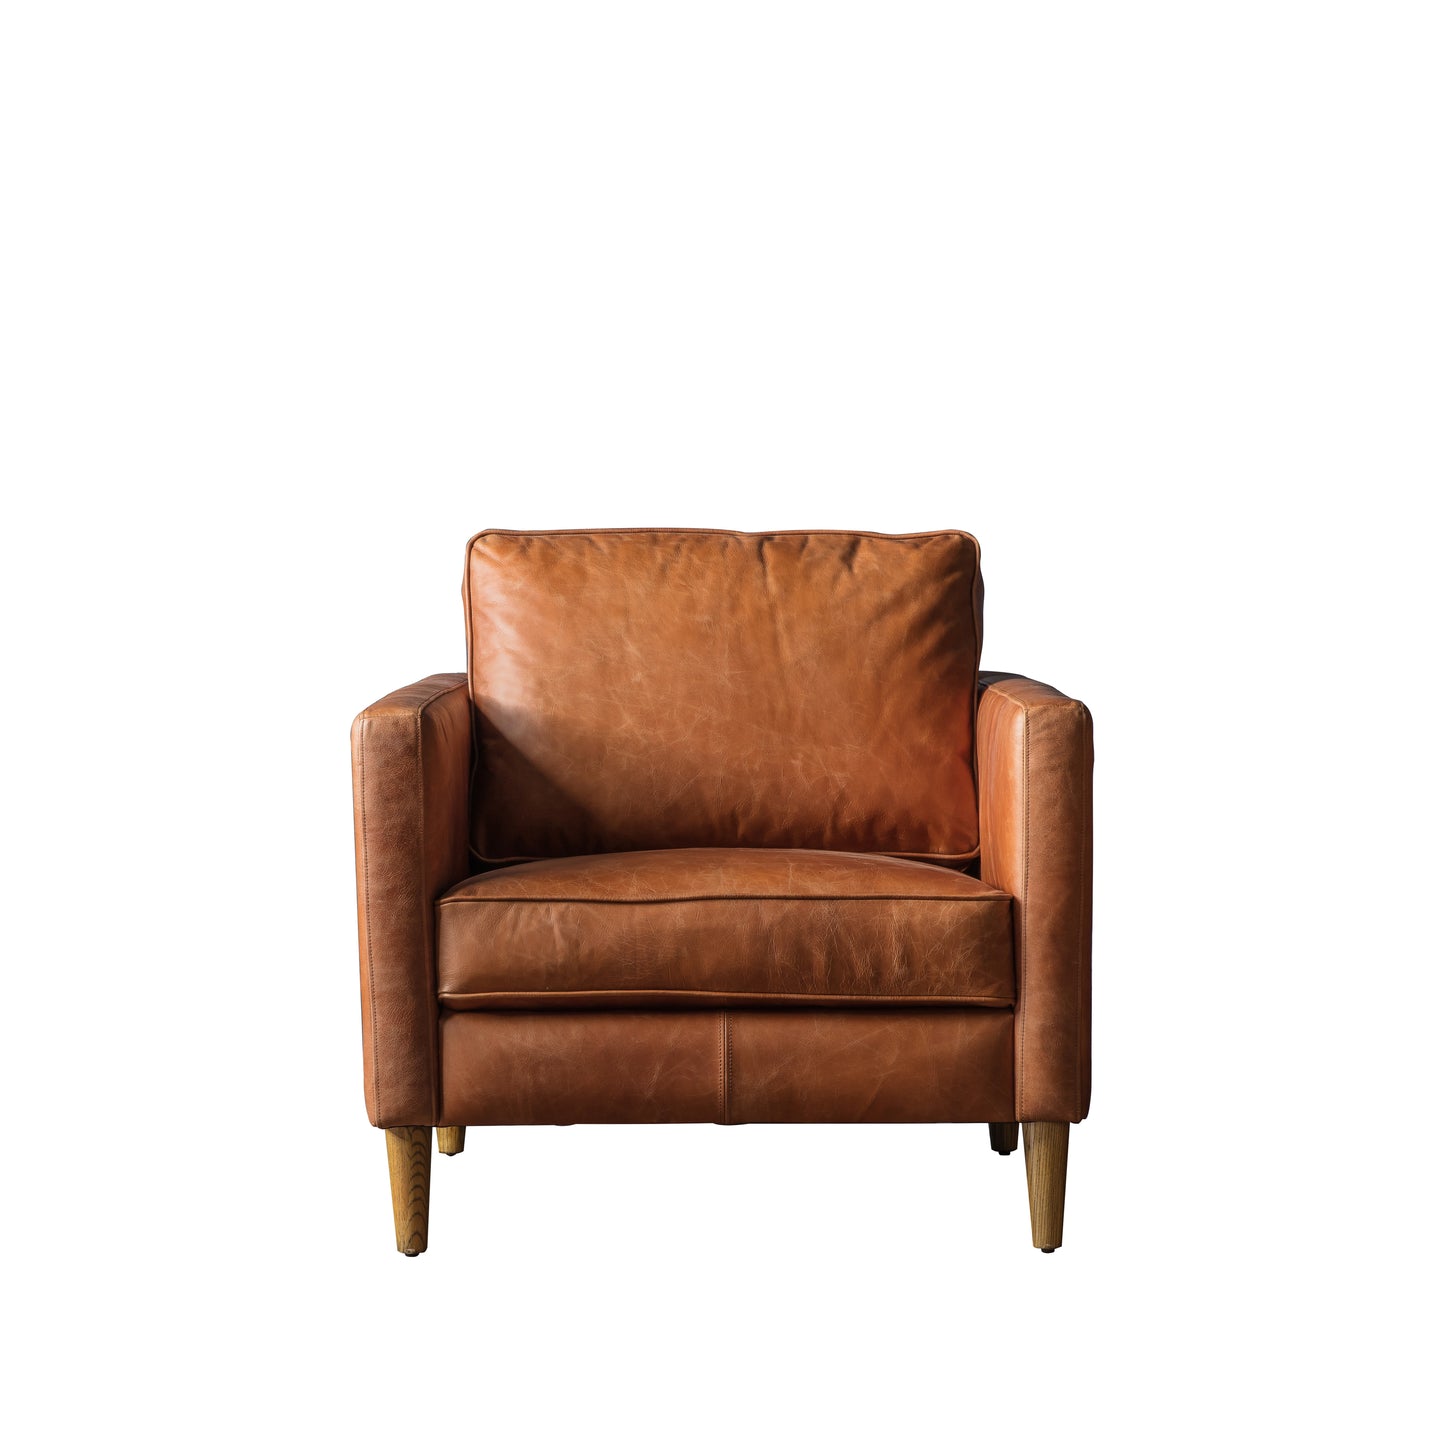 A Vintage Brown Leather Armchair by Kikiathome.co.uk for Interior Decor.